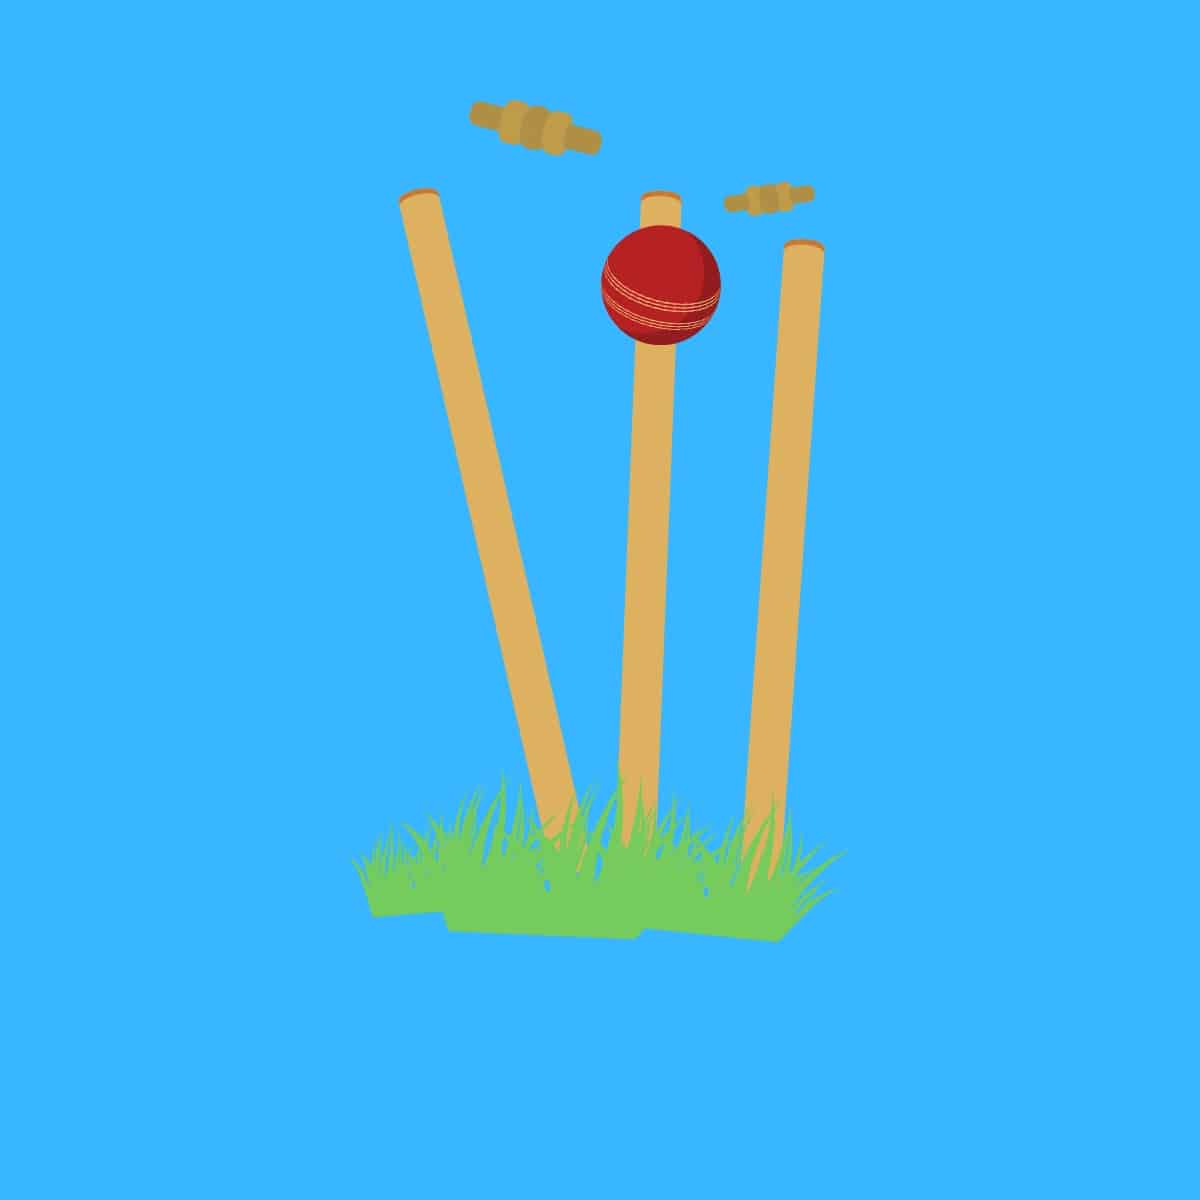 Cartoon graphic of a cricket ball knocking off the stumps of the wickets on blue background.